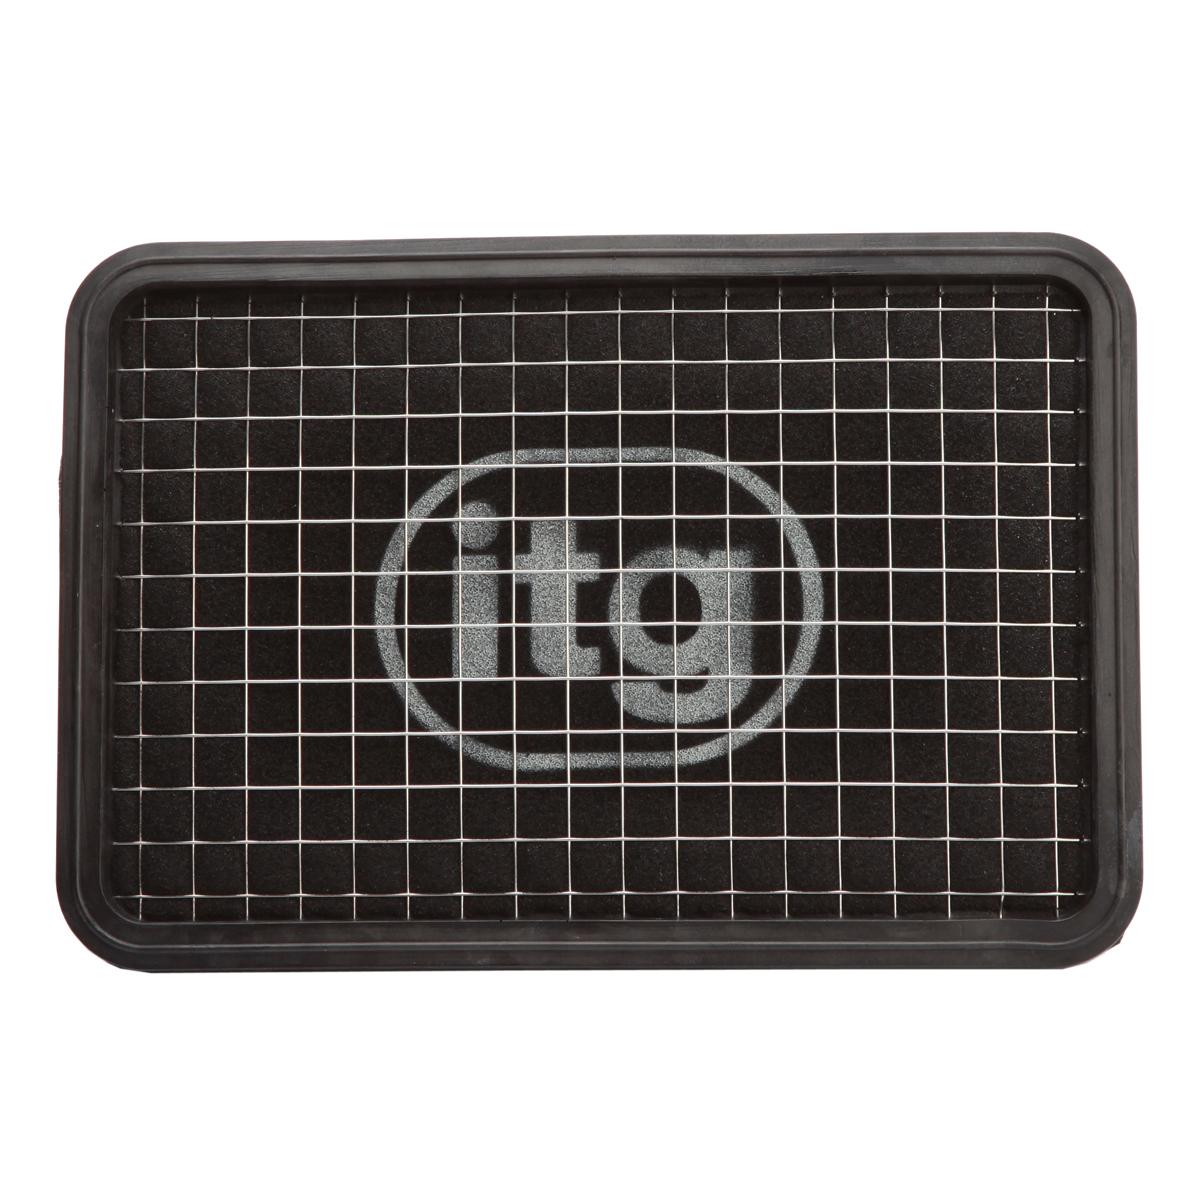 ITG Air Filter For Mitsubishi Evo X (With Frame)